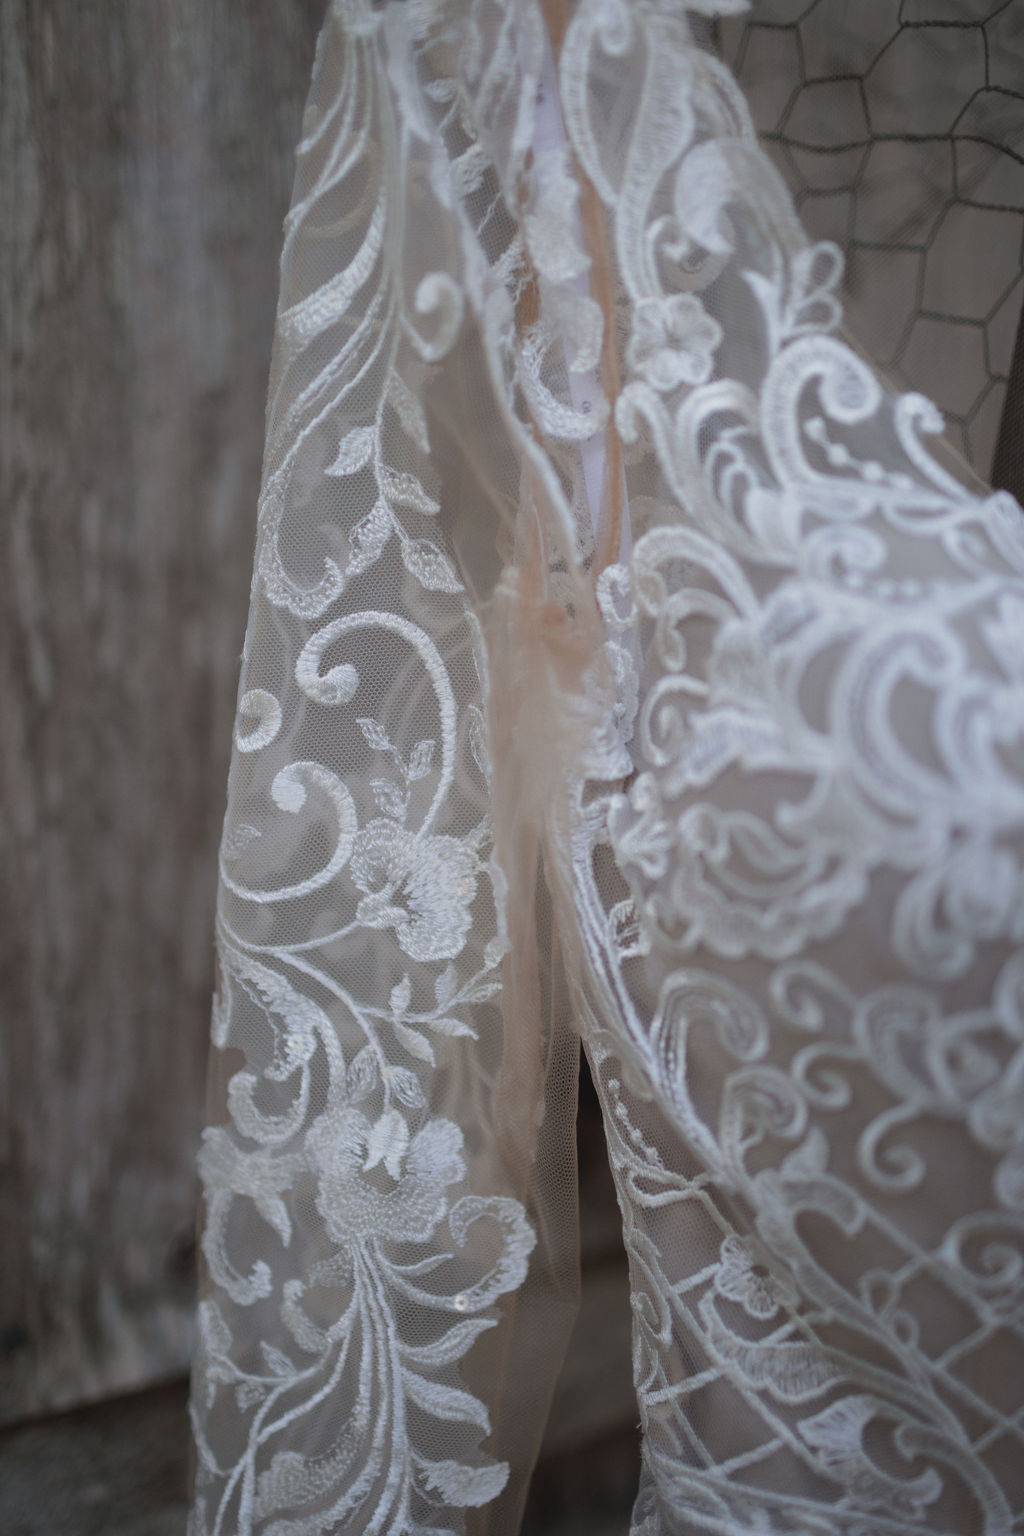 The edge of a bride's dress showing the lace of the left sleeve
